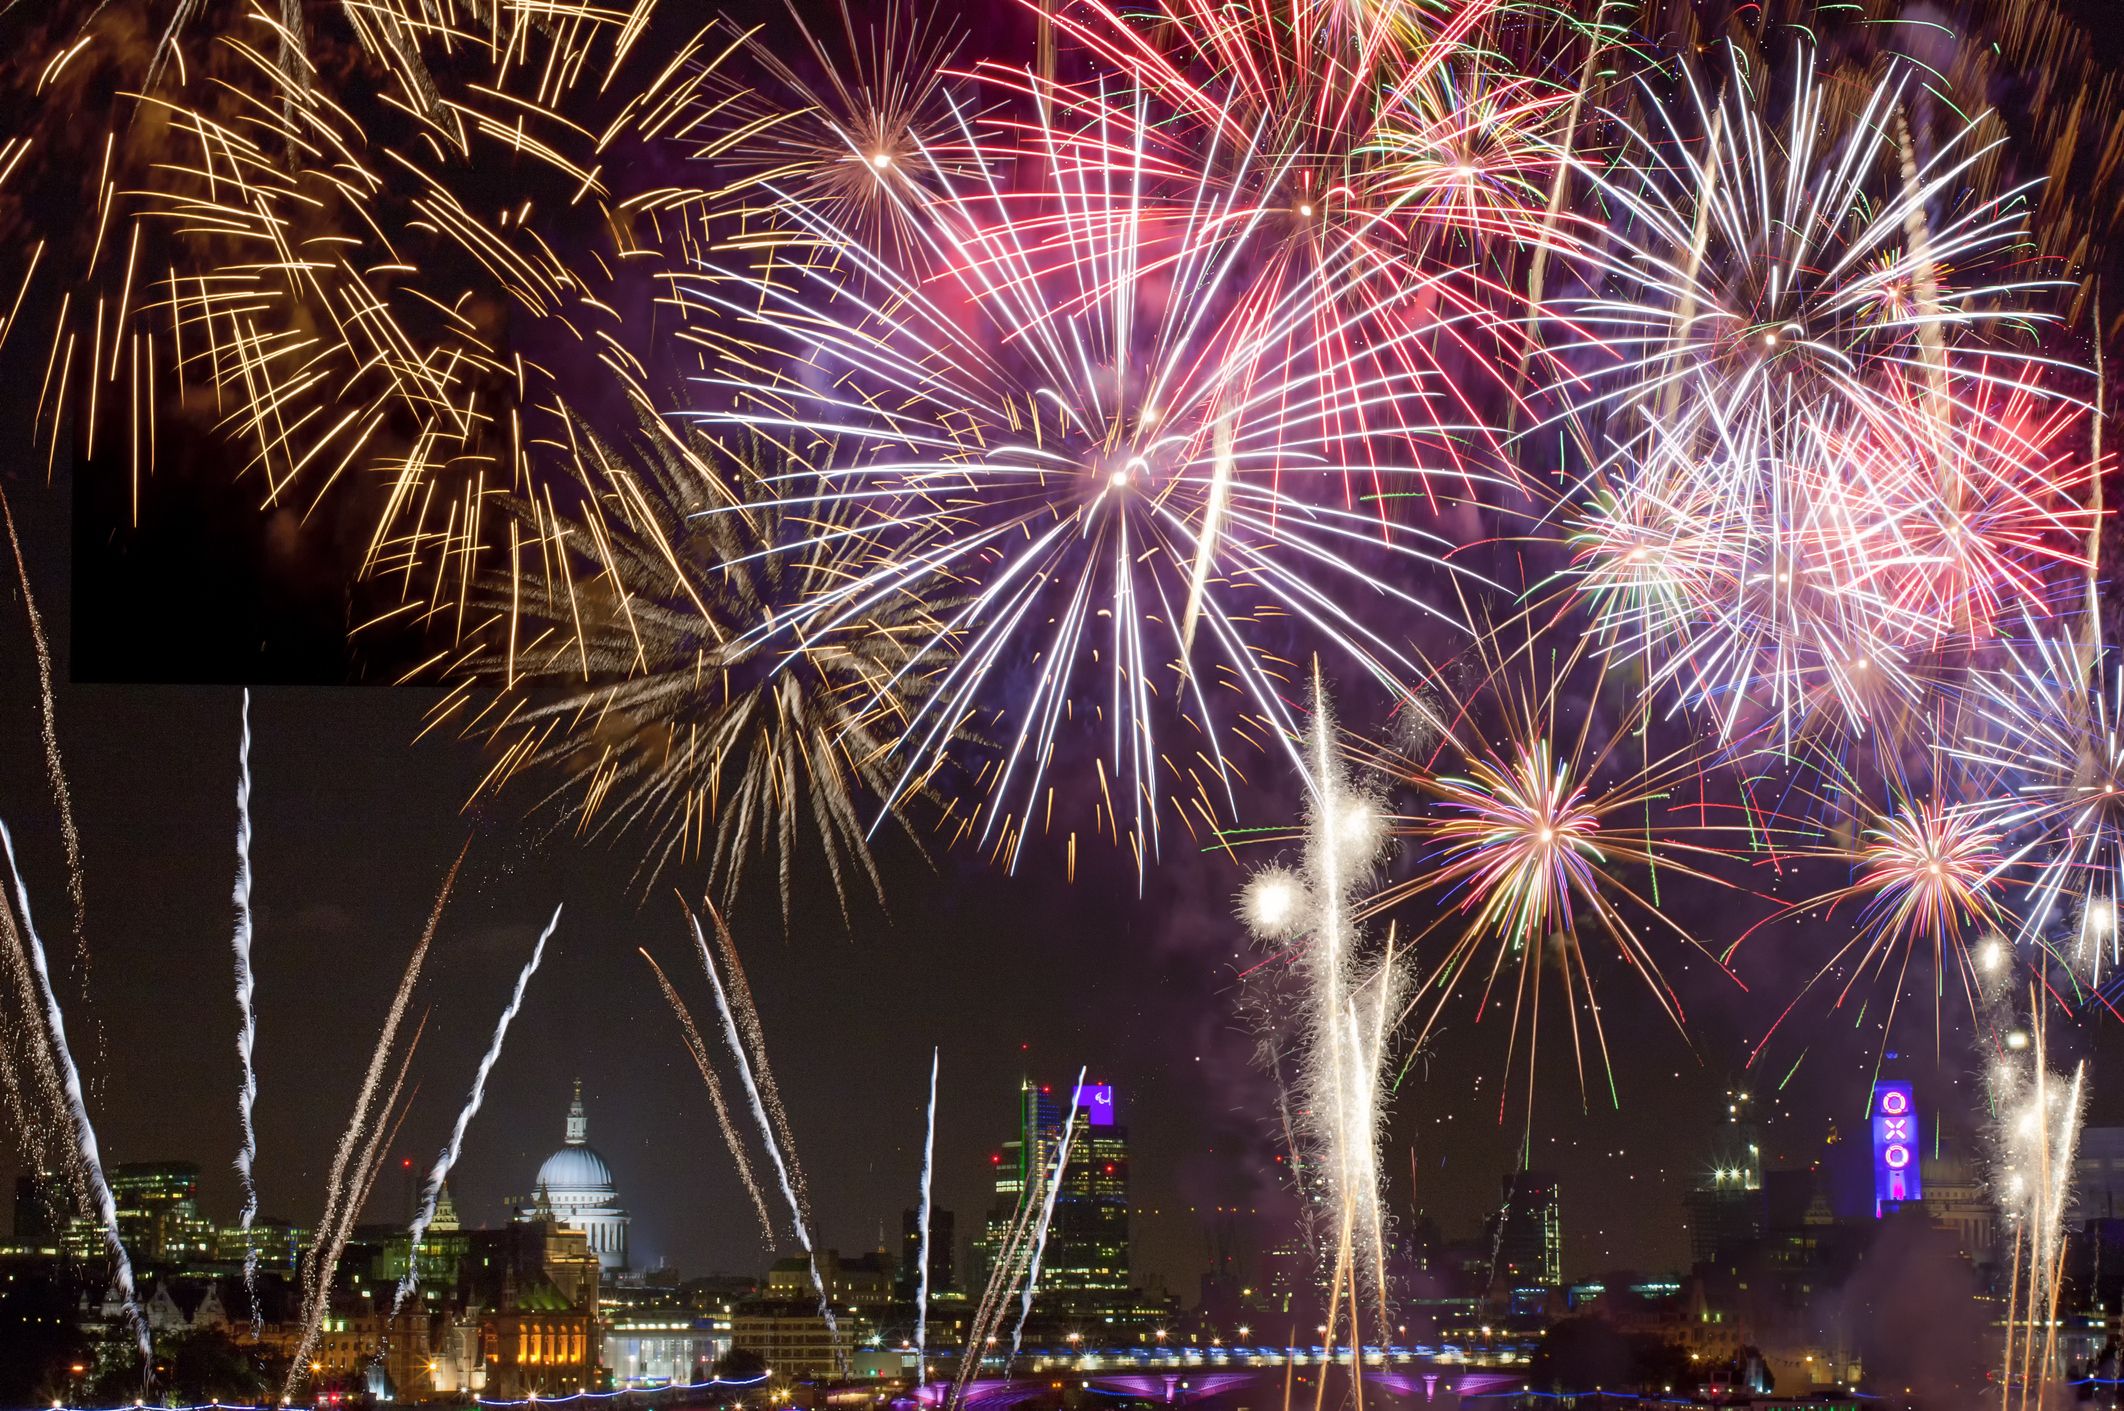 Top 10 places to go for New Year's Eve in the UK